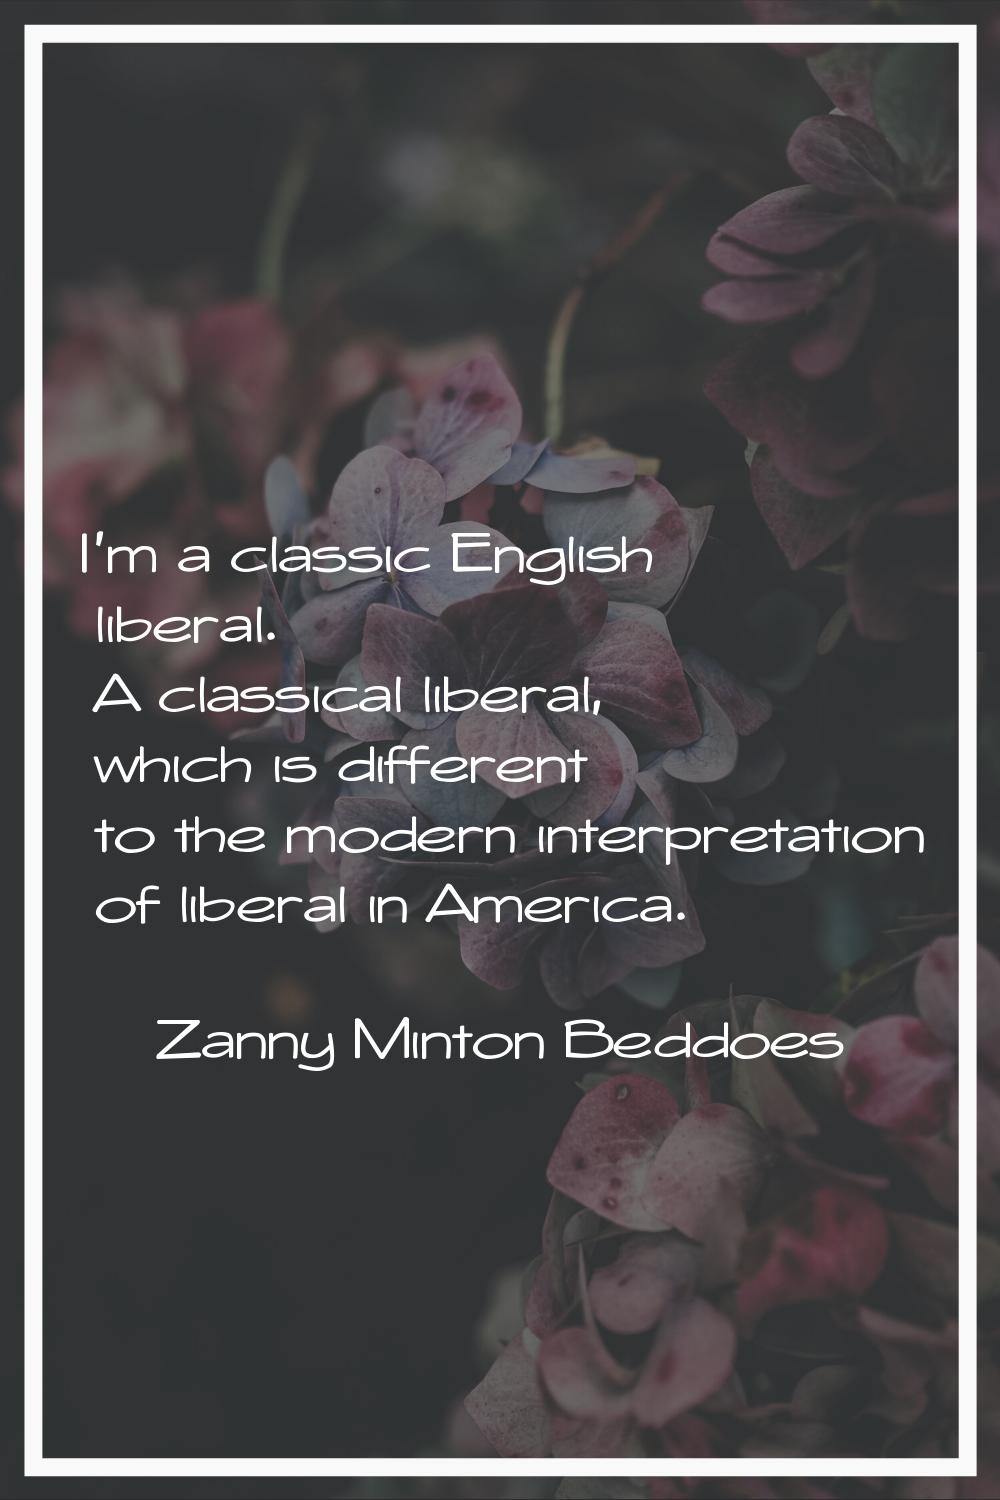 I'm a classic English liberal. A classical liberal, which is different to the modern interpretation